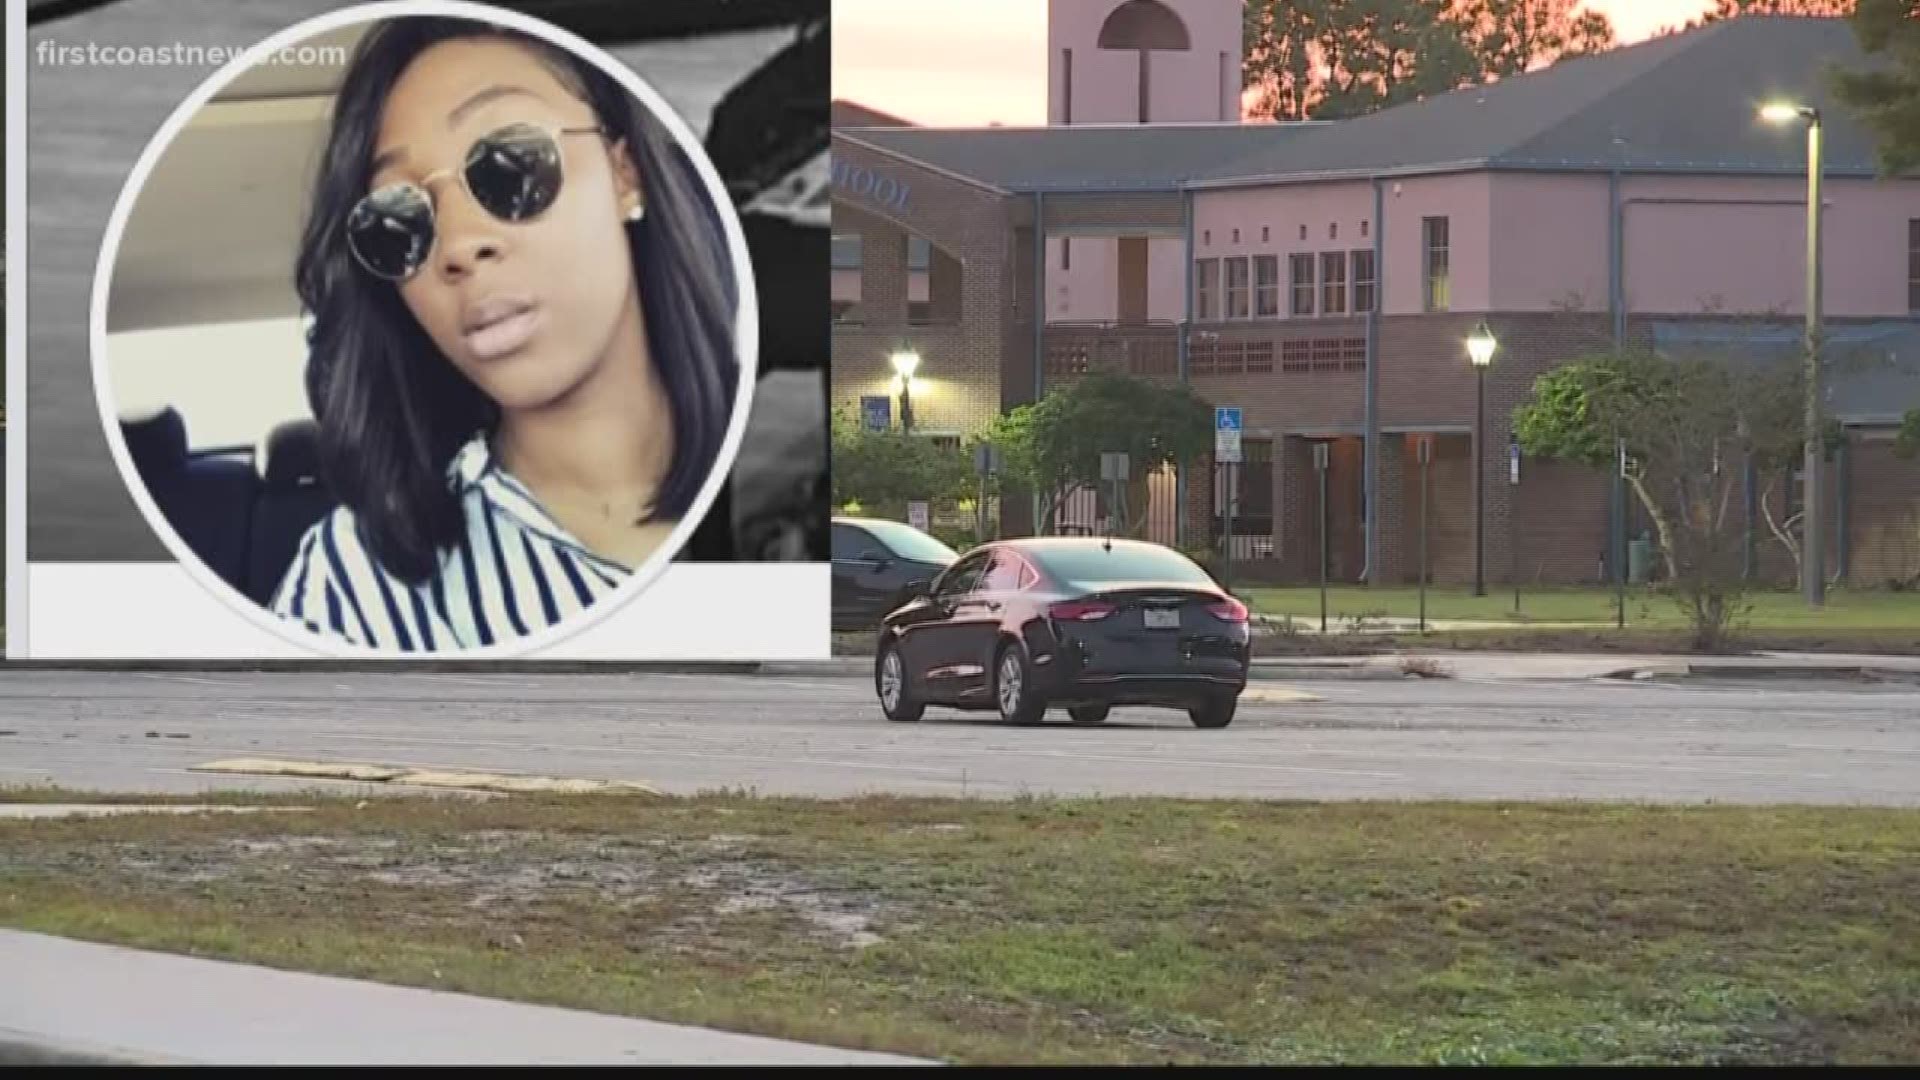 Christine S. Dennard, who is a music teacher at First Coast High School, was charged with five counts of unlawful sexual activity with a 16 or 17-year-old victim.